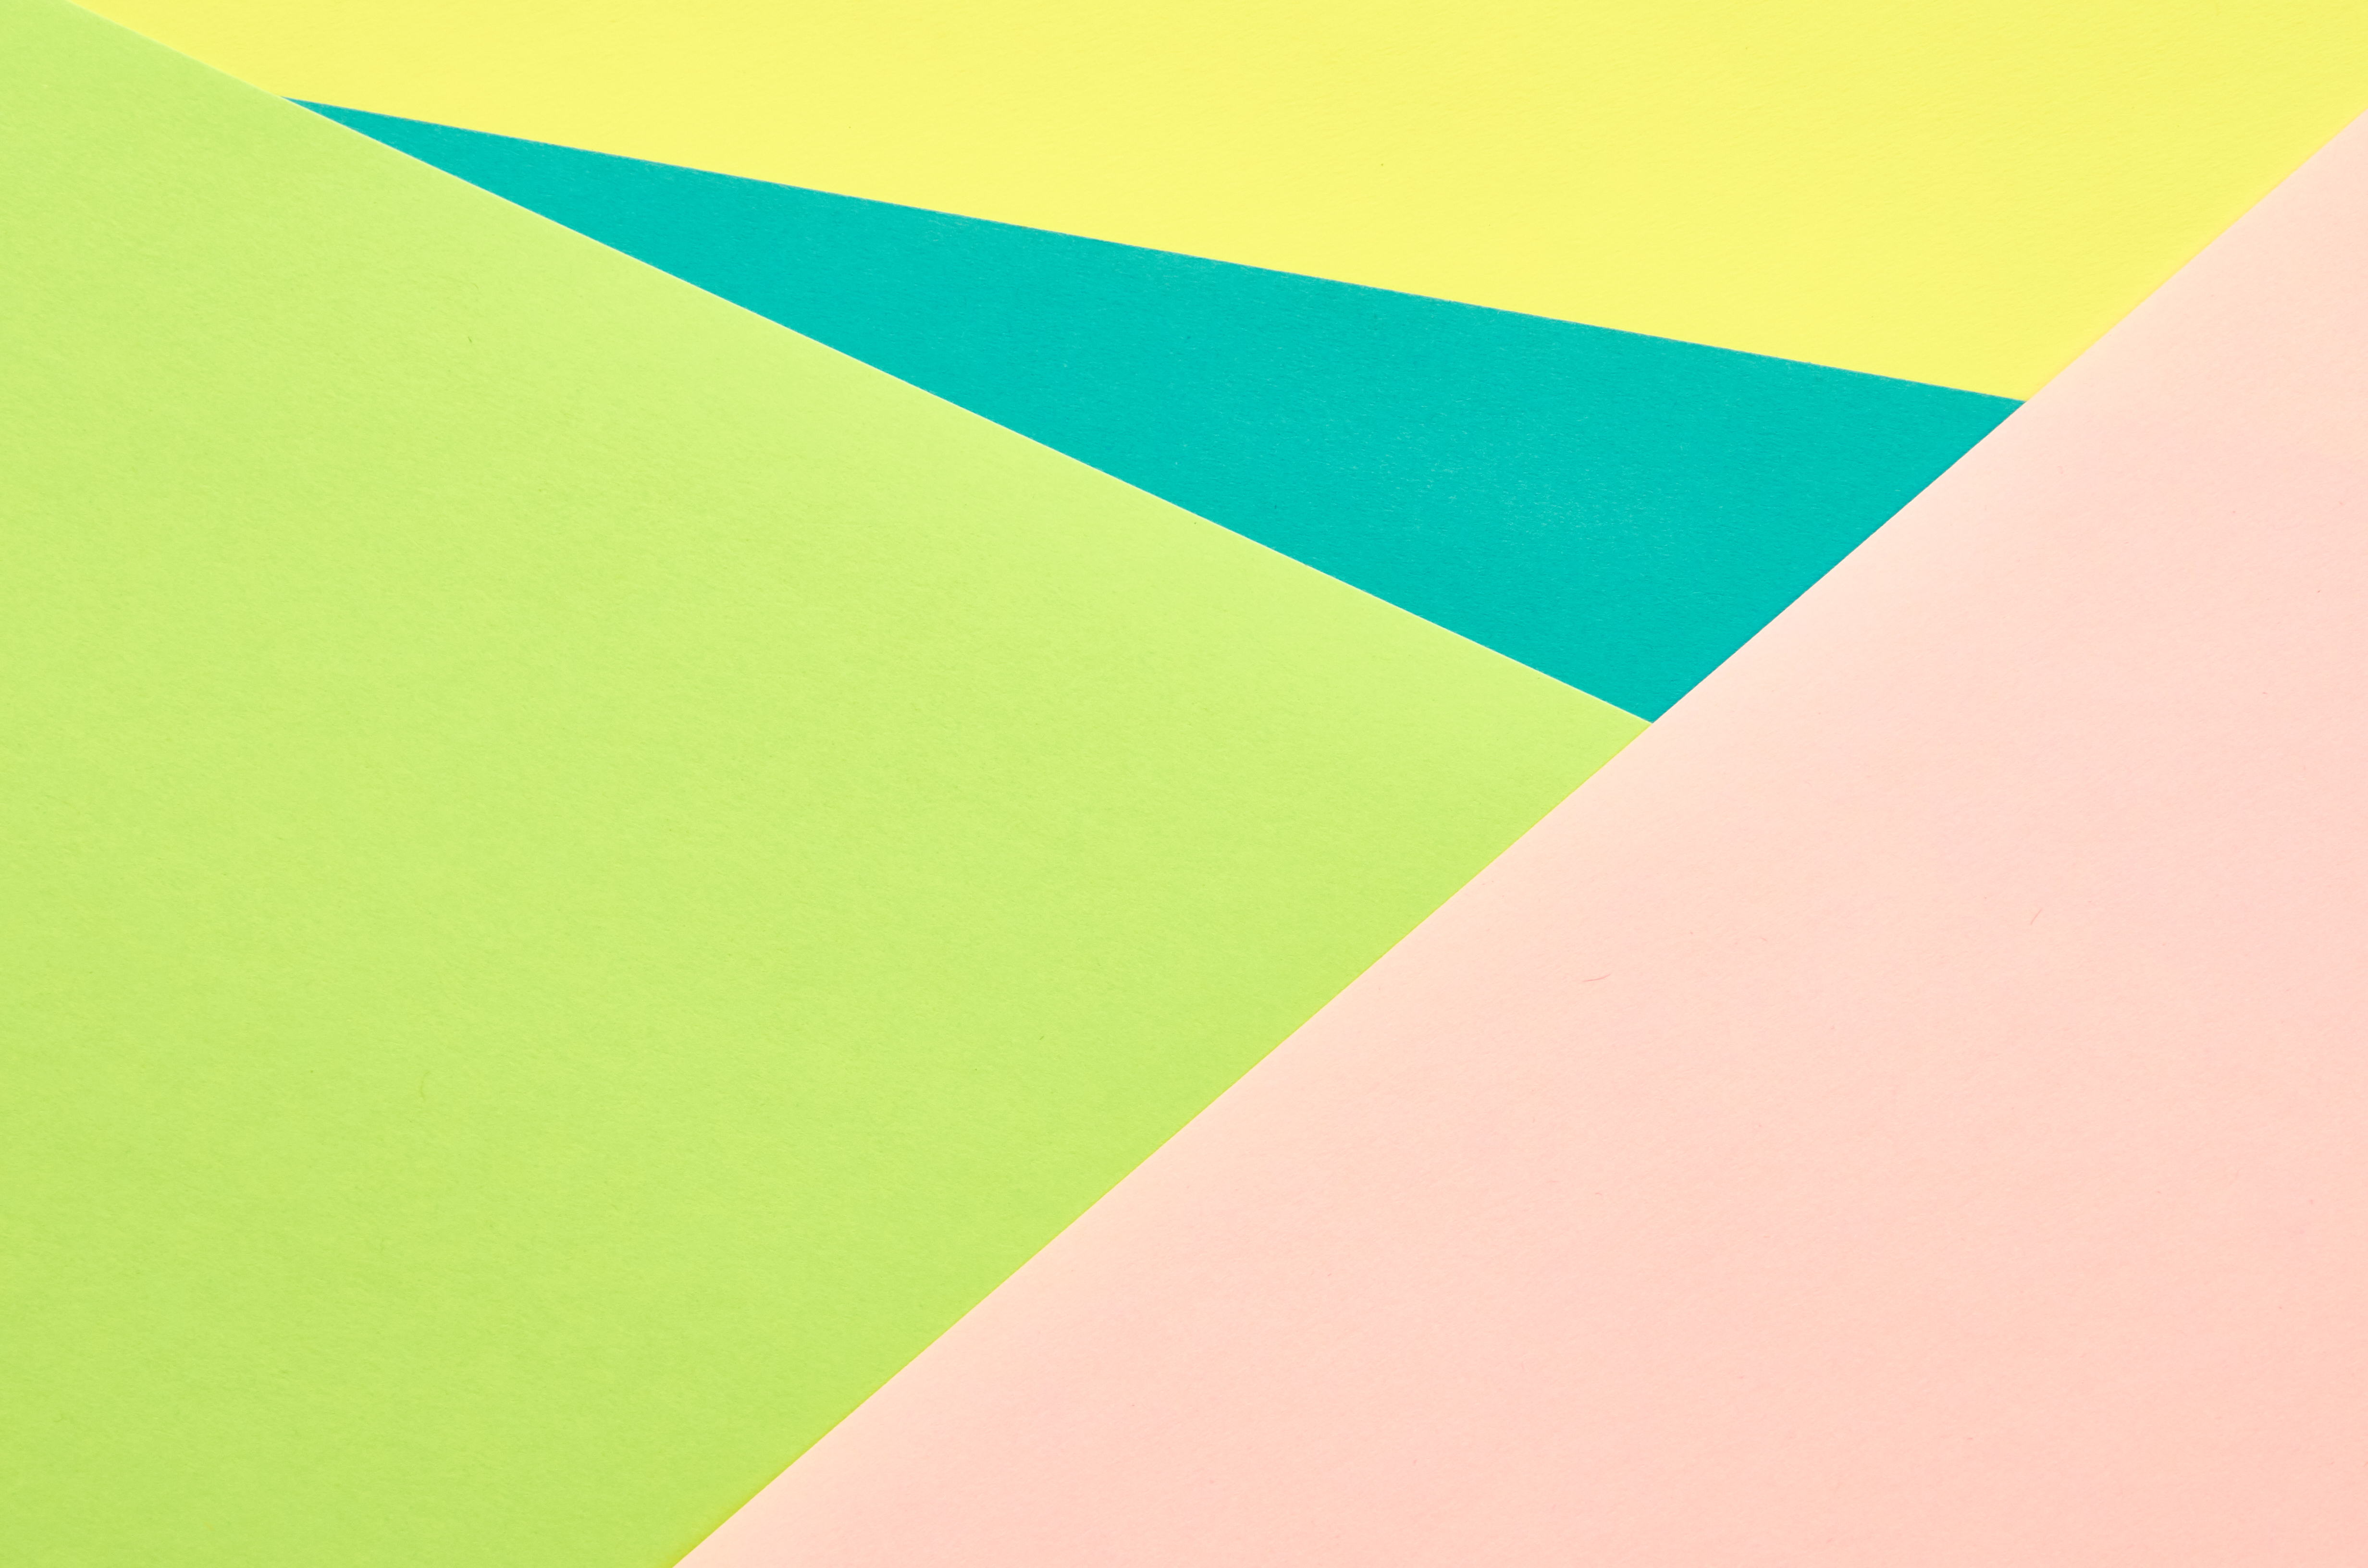 multicolored, motley, abstract, shape, shapes, triangles, fragments Free Stock Photo